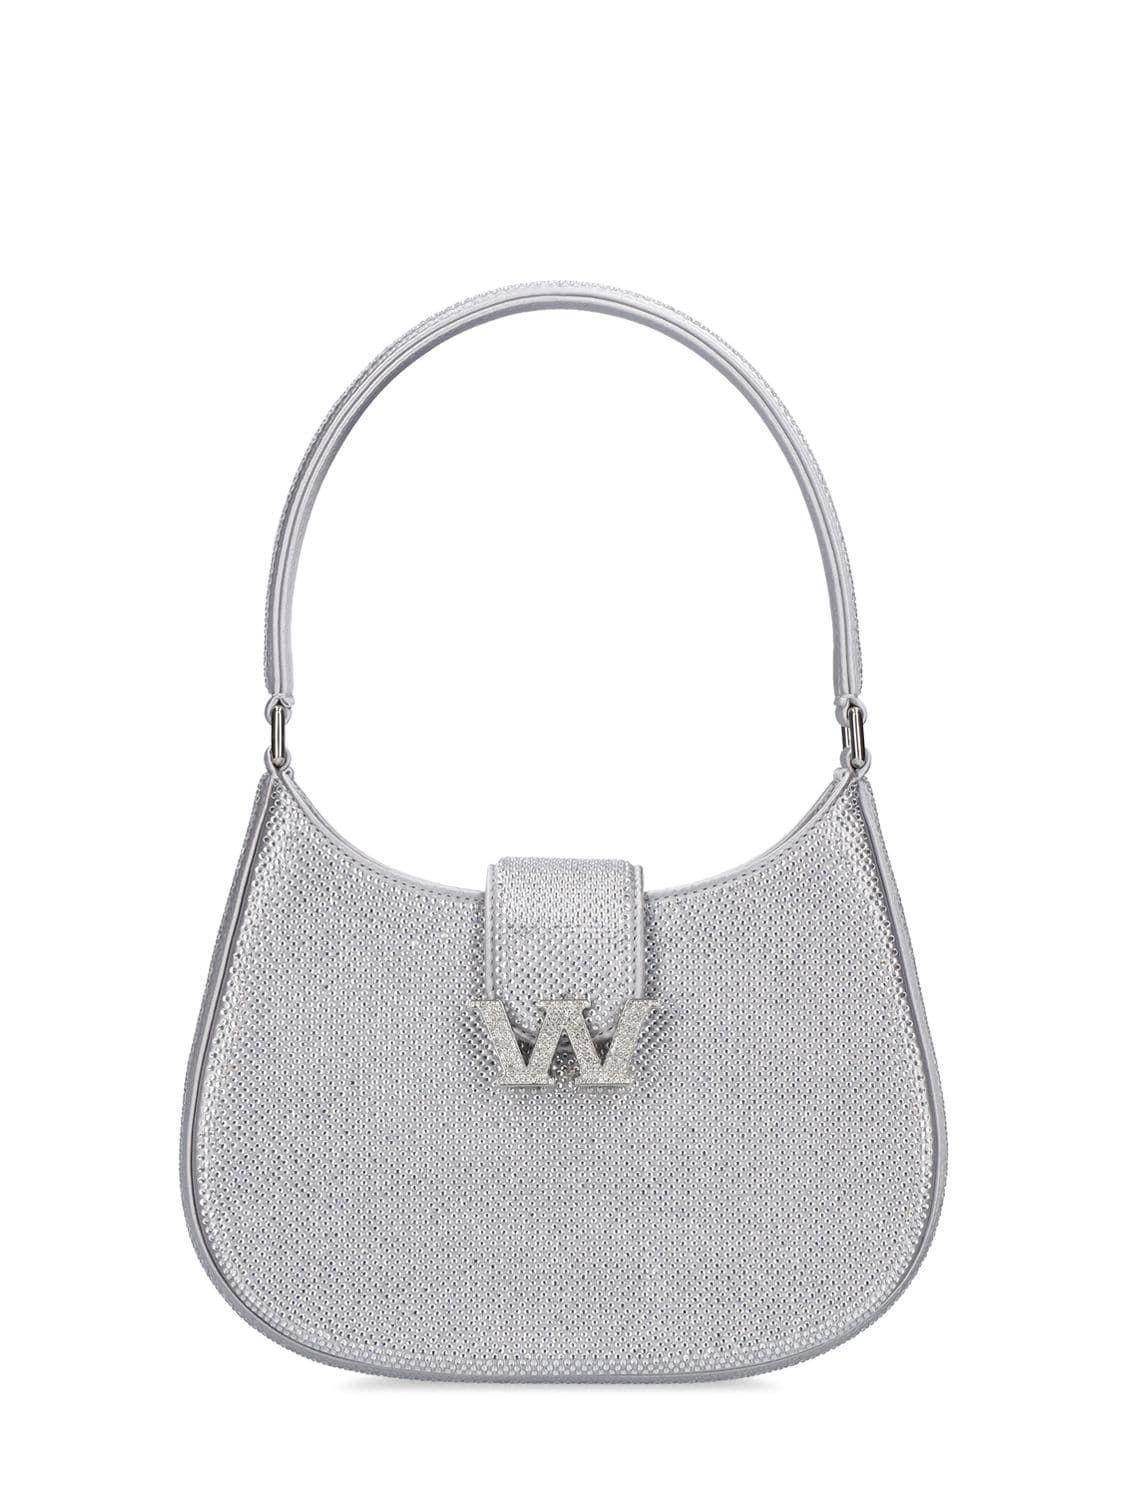 Alexander Wang Small W Legacy Hobo Bag in White | Lyst